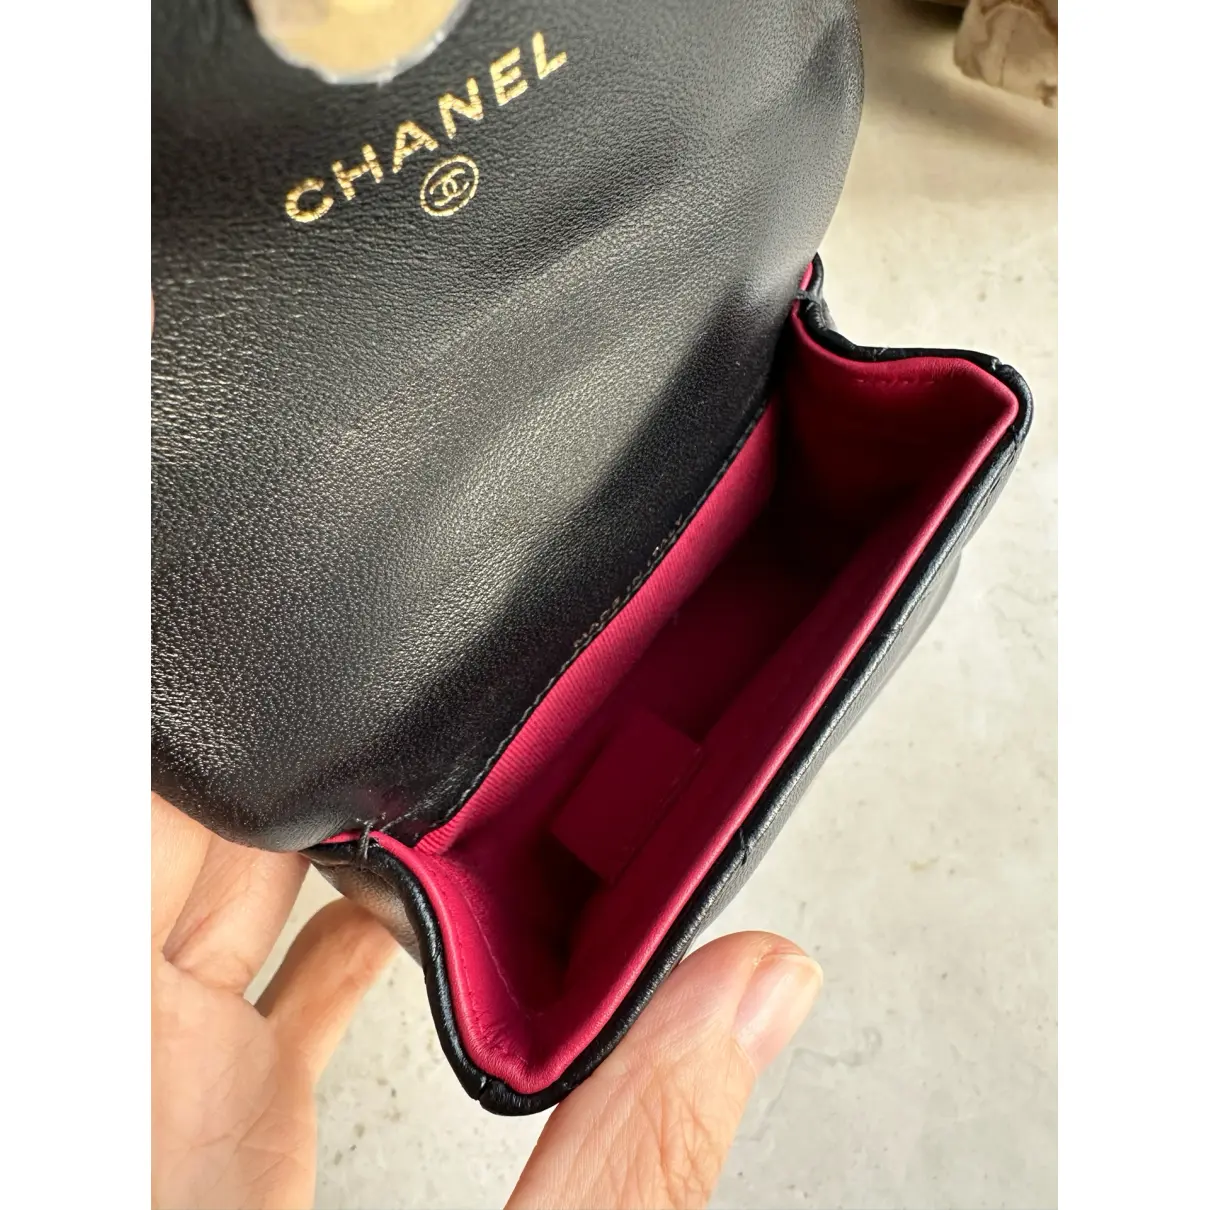 Chanel 19 leather purse Chanel